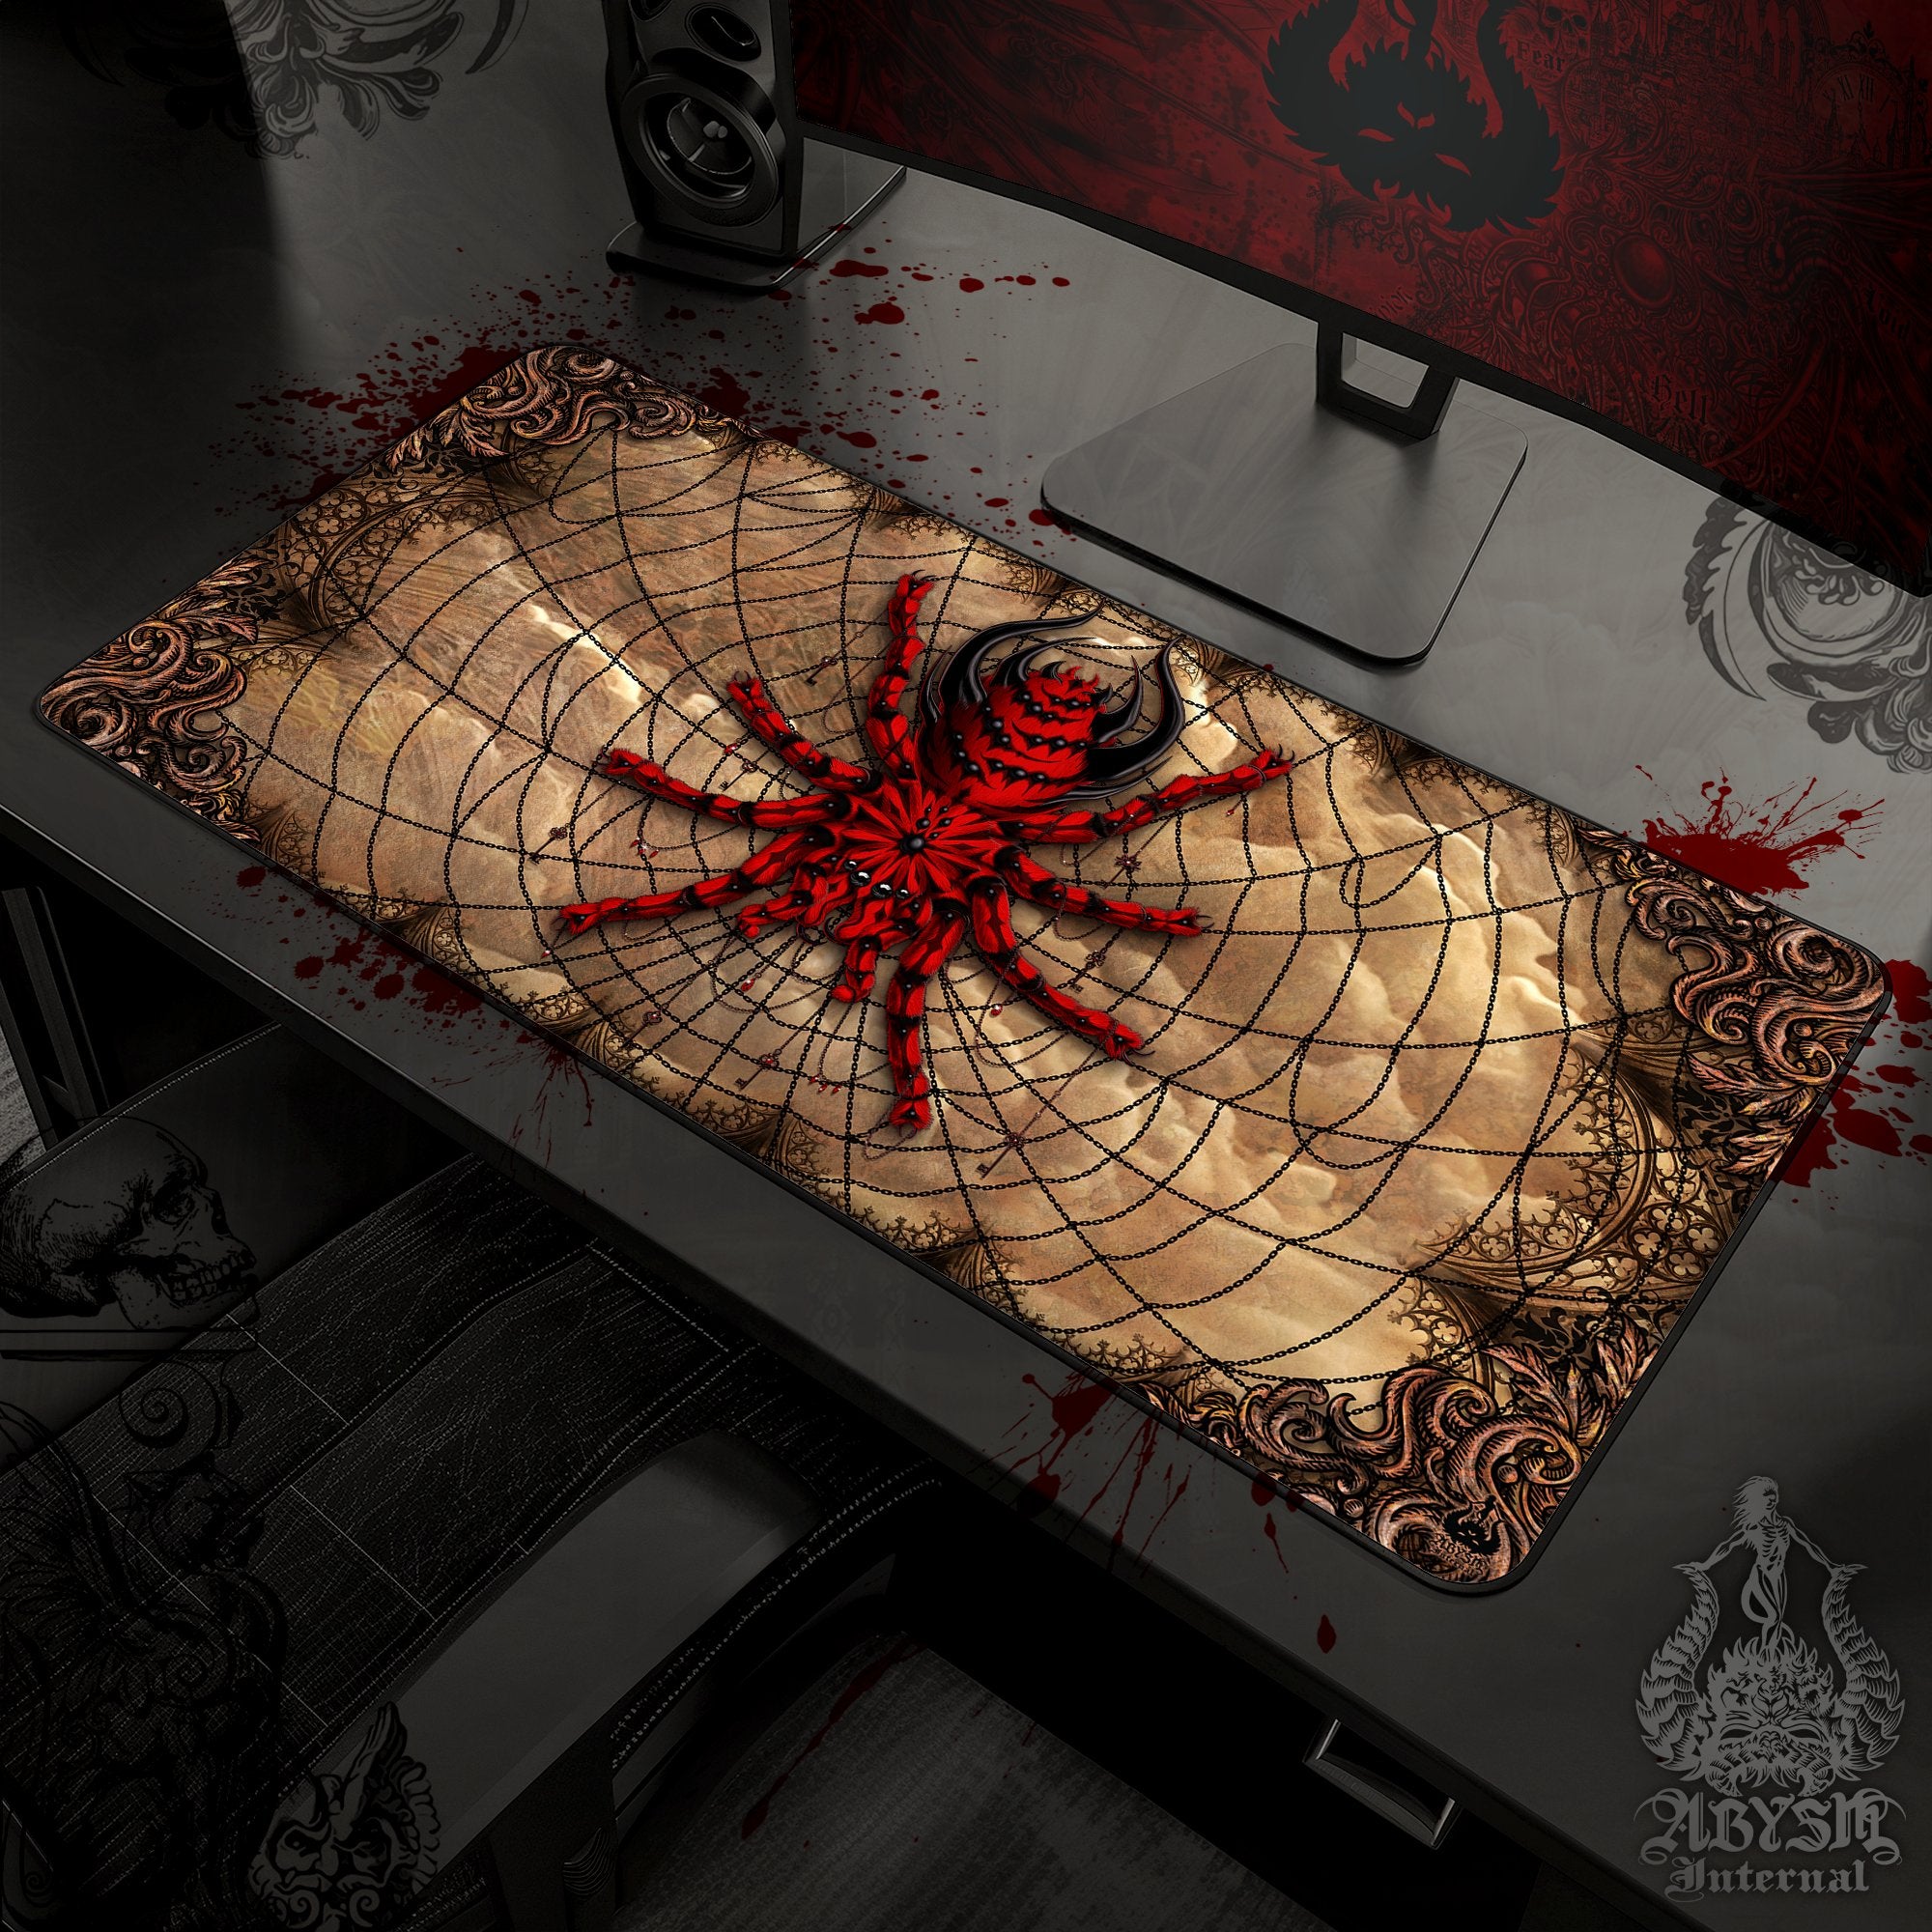 Halloween Mouse Pad, Gothic Gaming Desk Mat, Horror Tarantula Workpad, Gamer Table Protector Cover, Spider Art Print - 2 Colors - Abysm Internal